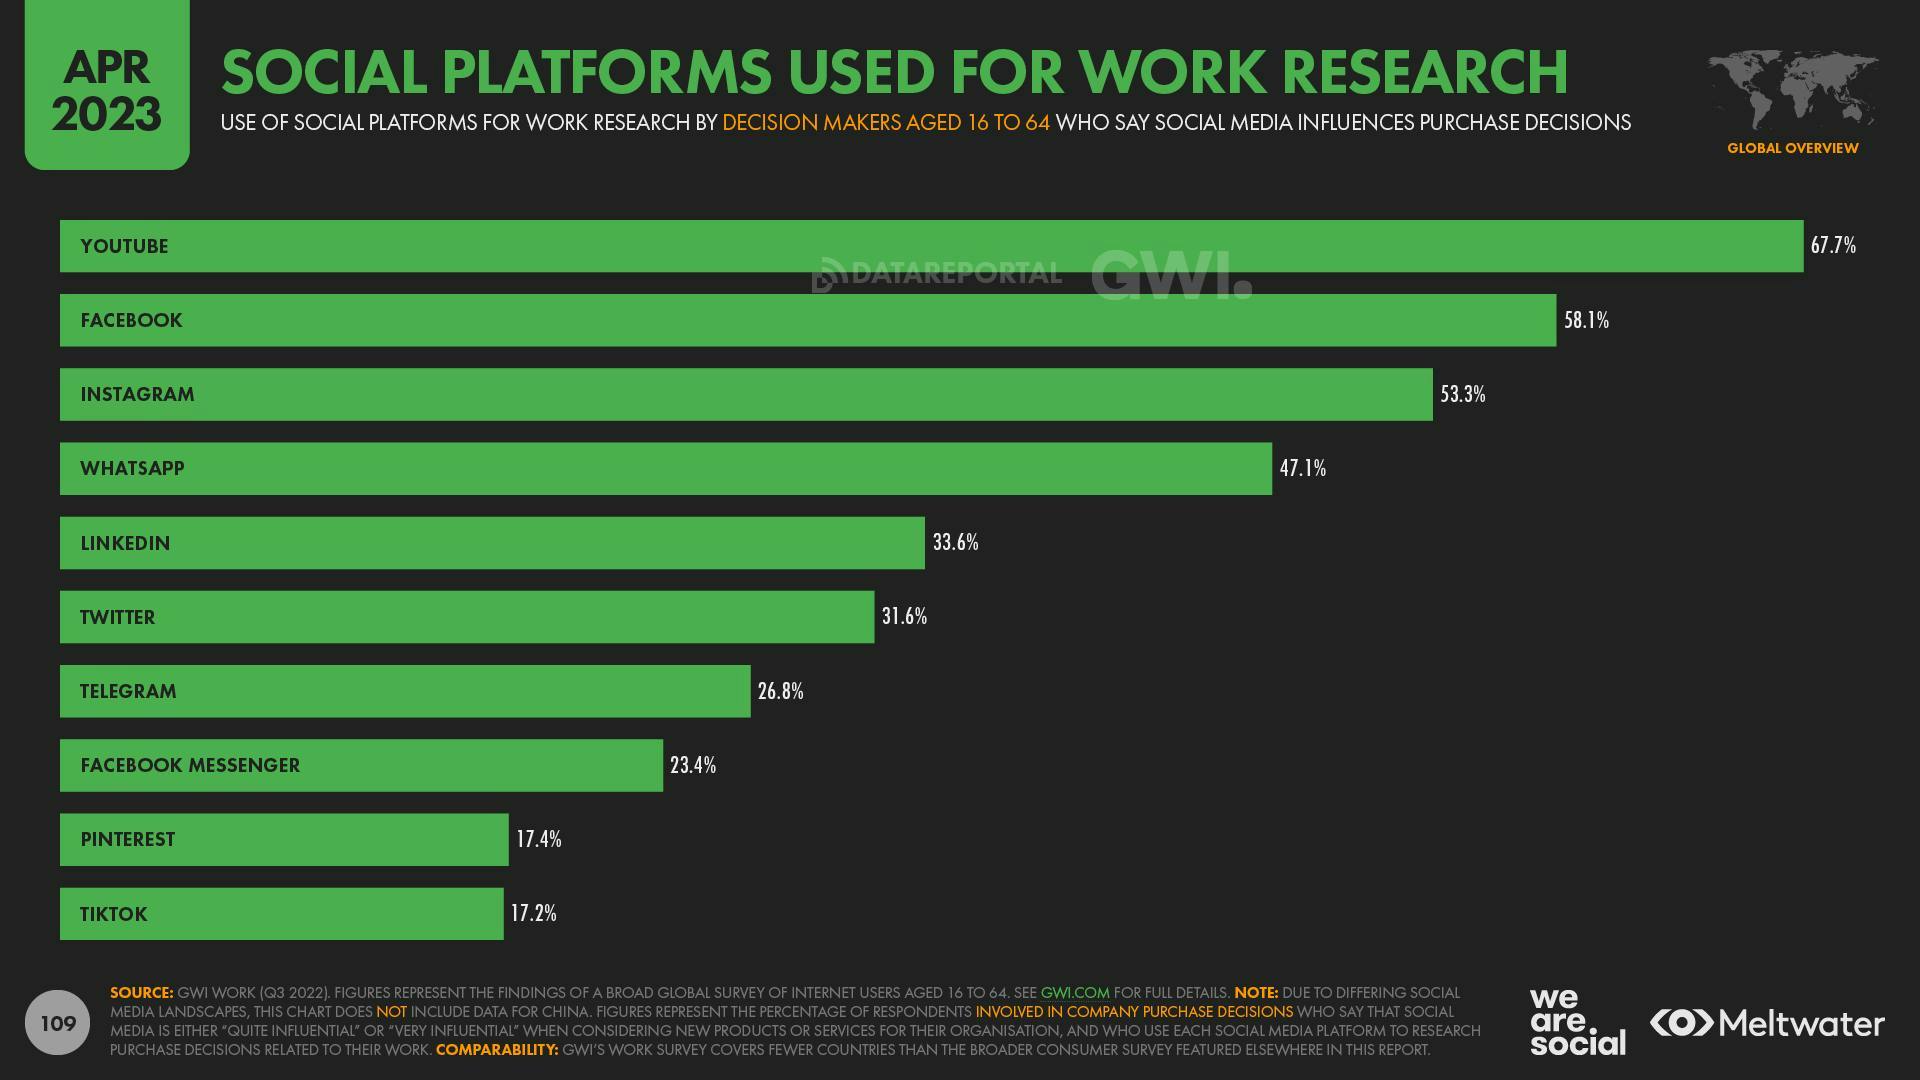 April 2023 Global State of Digital Report: Social Platforms Used for Work Research